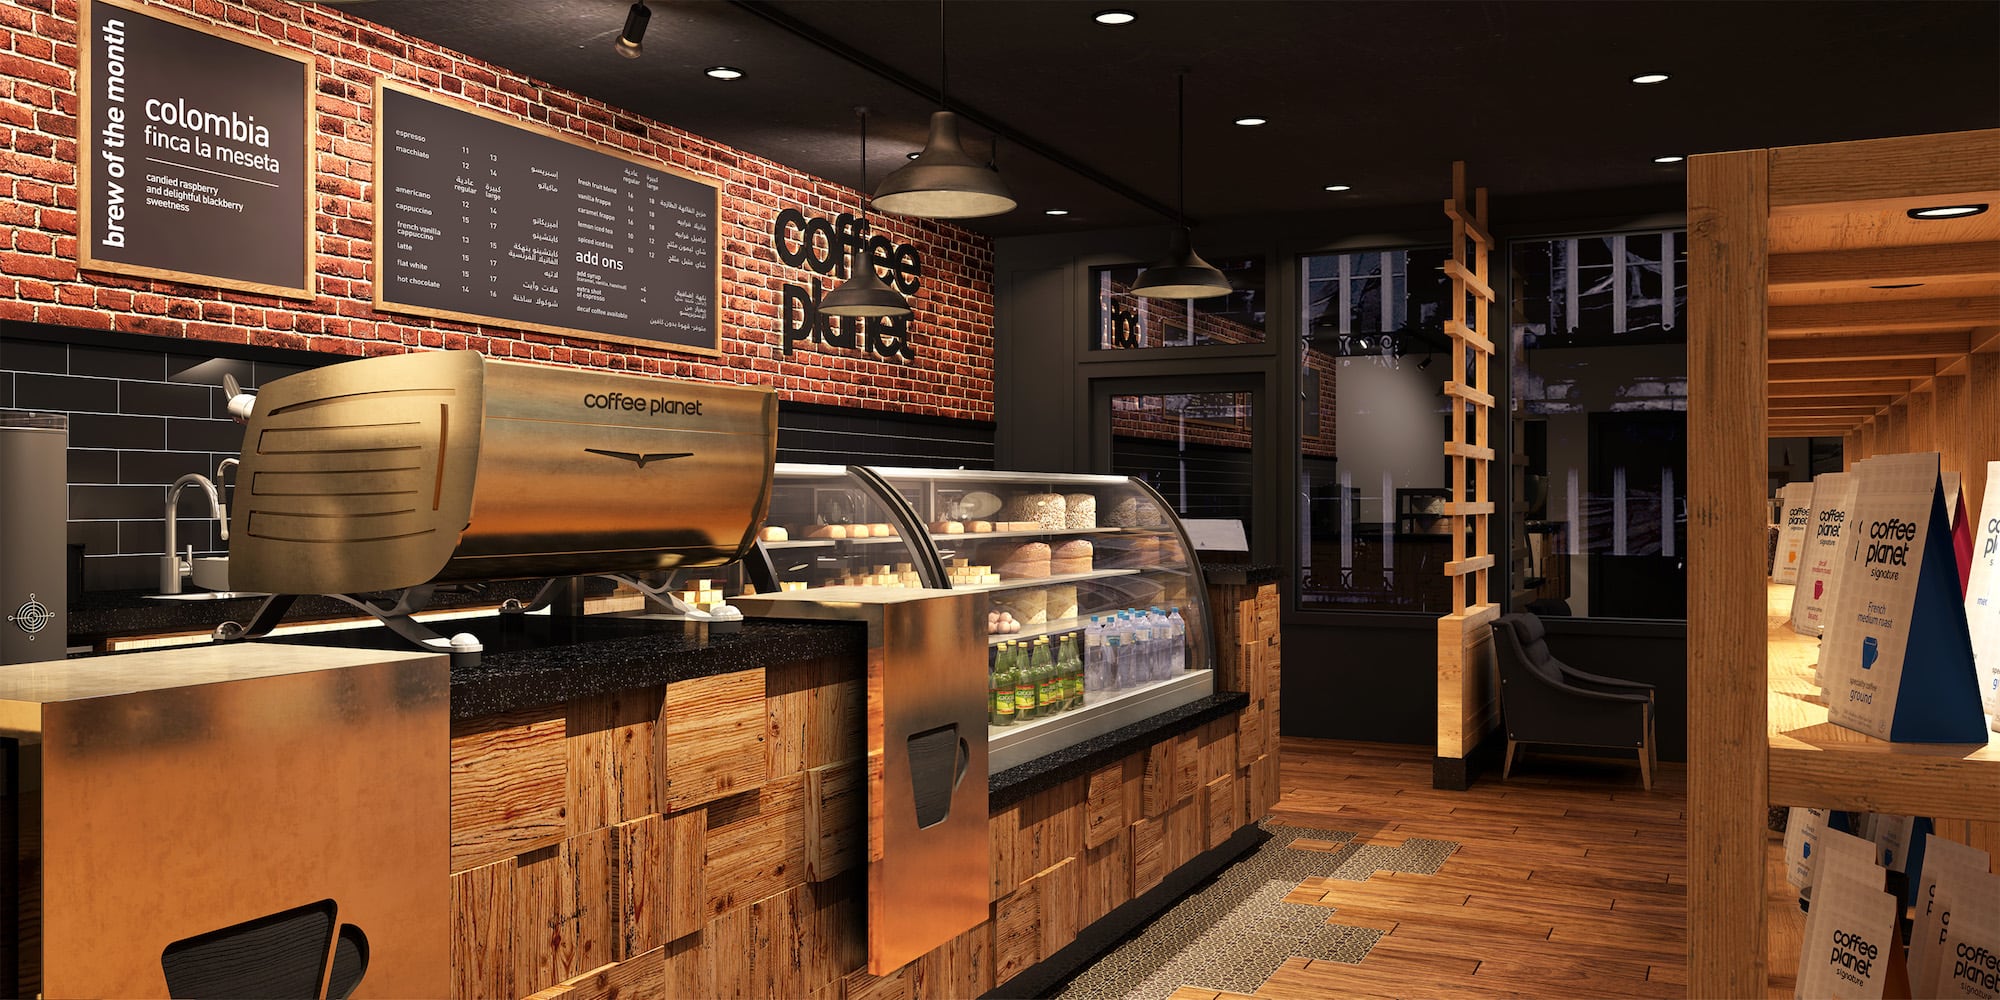 Start your own coffee shop with a Coffee Planet franchise